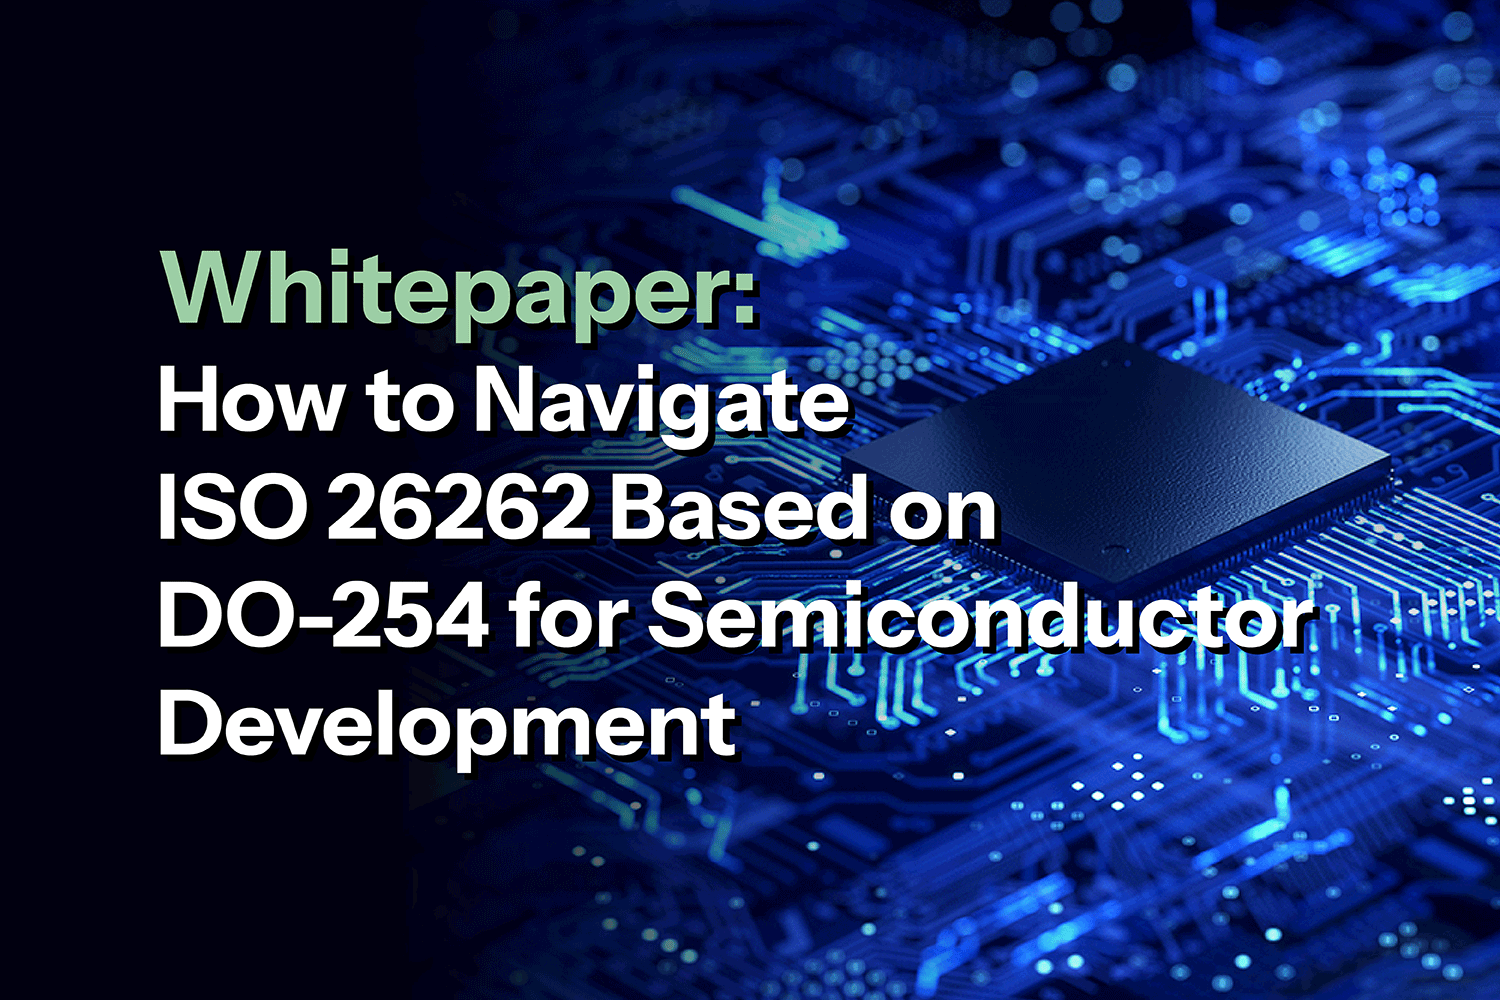 LSS-Knowledge-Center-Whitepaper-How-to-Navigate-ISO-26262(...)-Card-Image-1